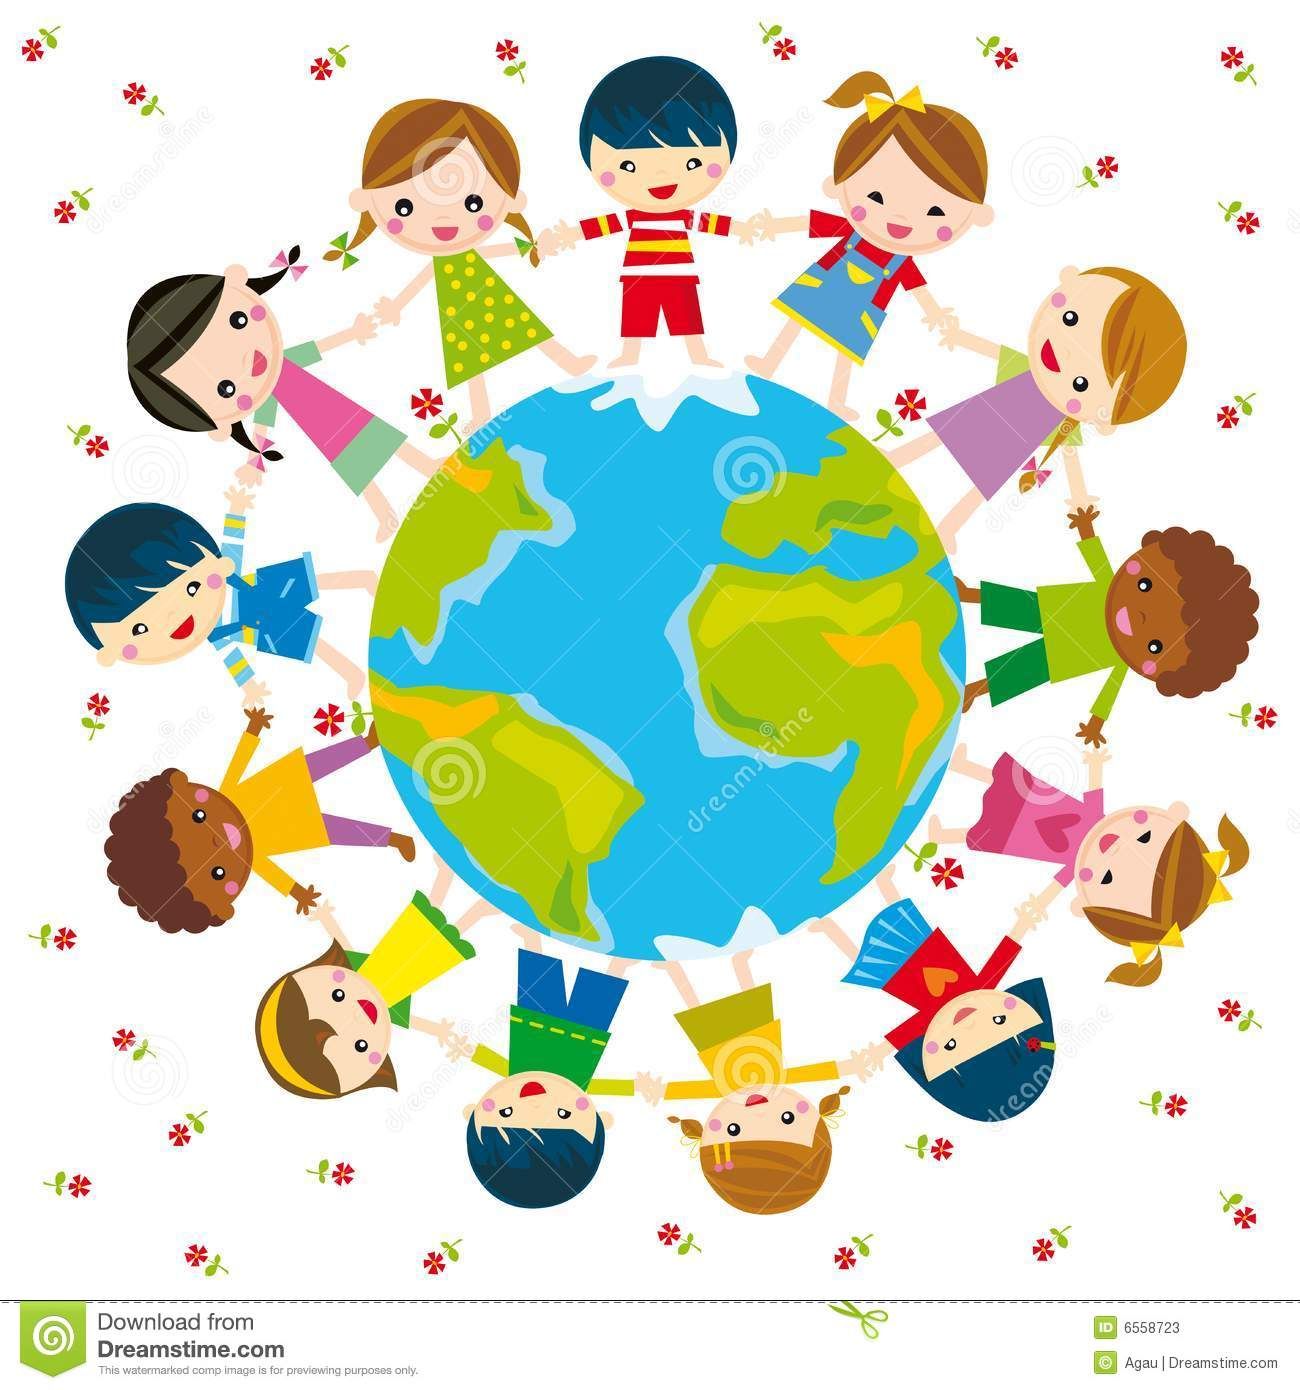 Illustration about Illustration of circle of children and